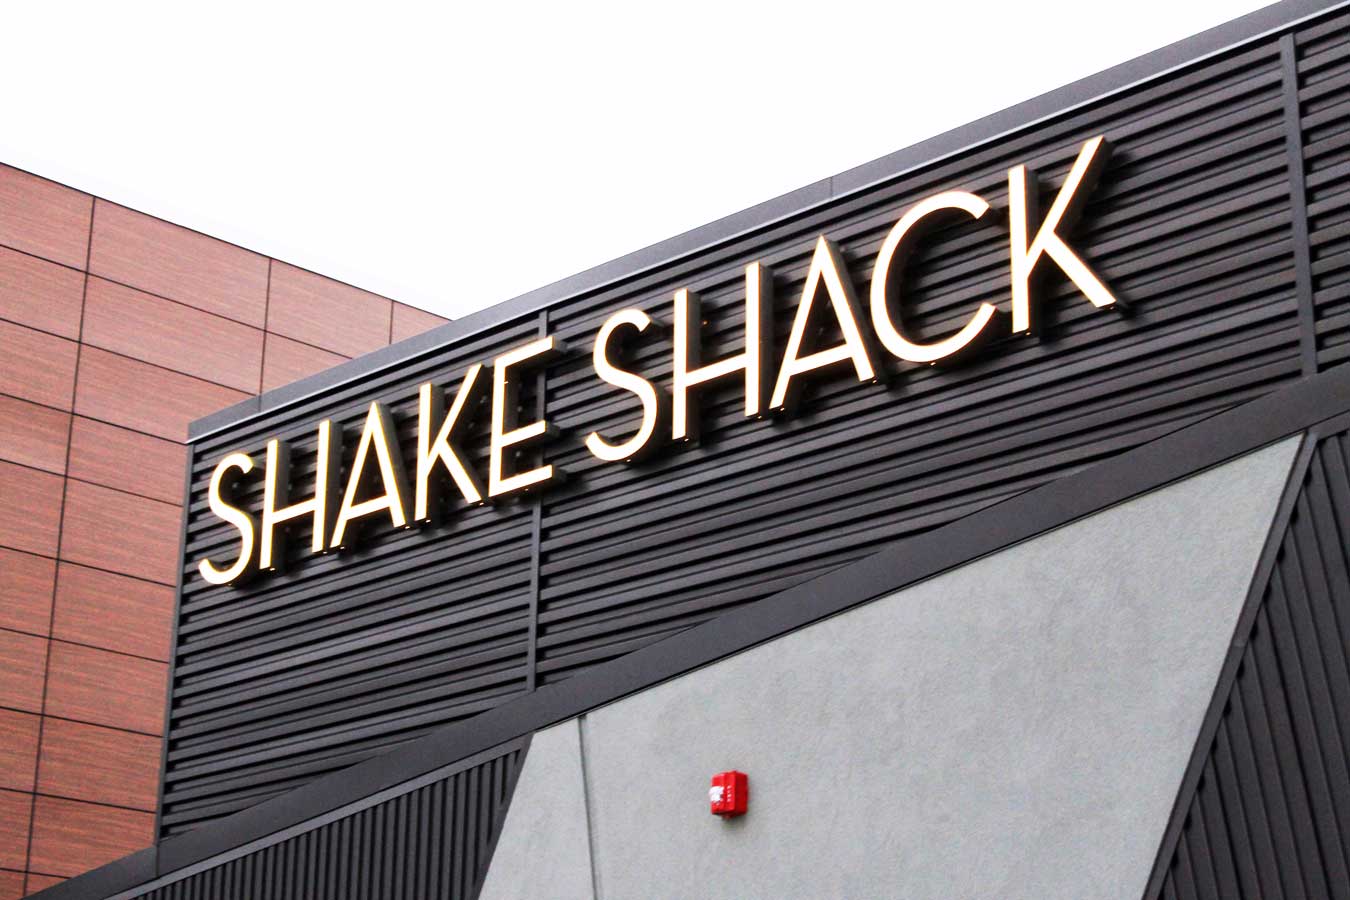 Shake Shack In Troy: Patio Dining, Foosball, And Sister Pie (Oh My) - via Wading in Big Shoes